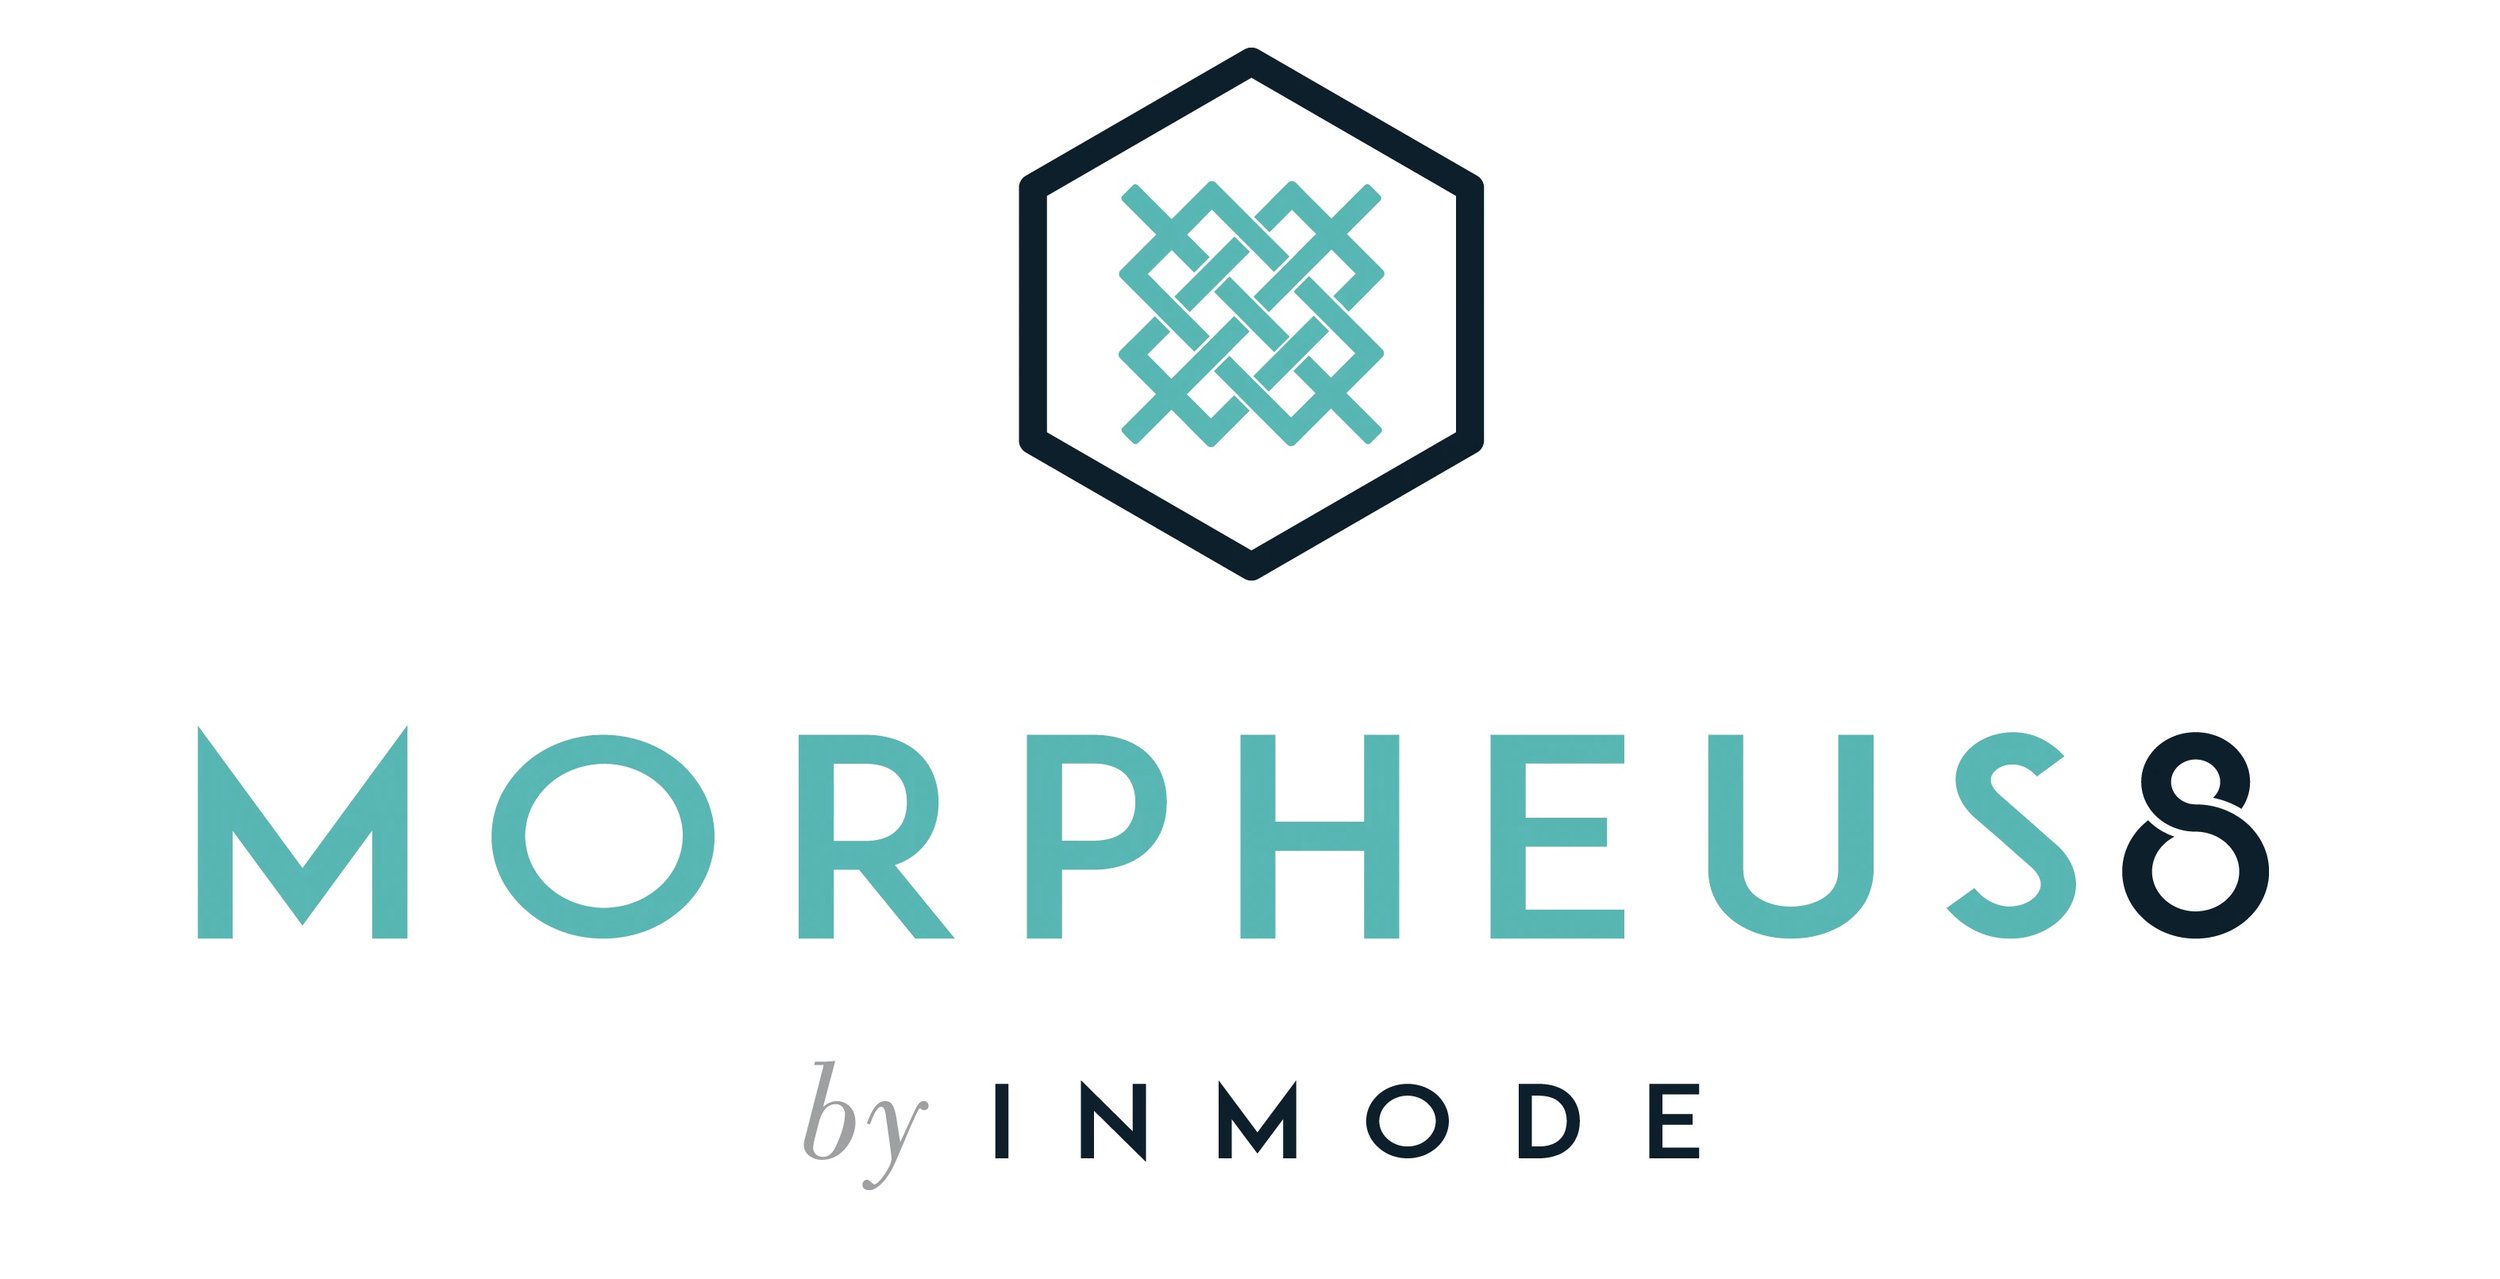 Morpheus8 by Inmode